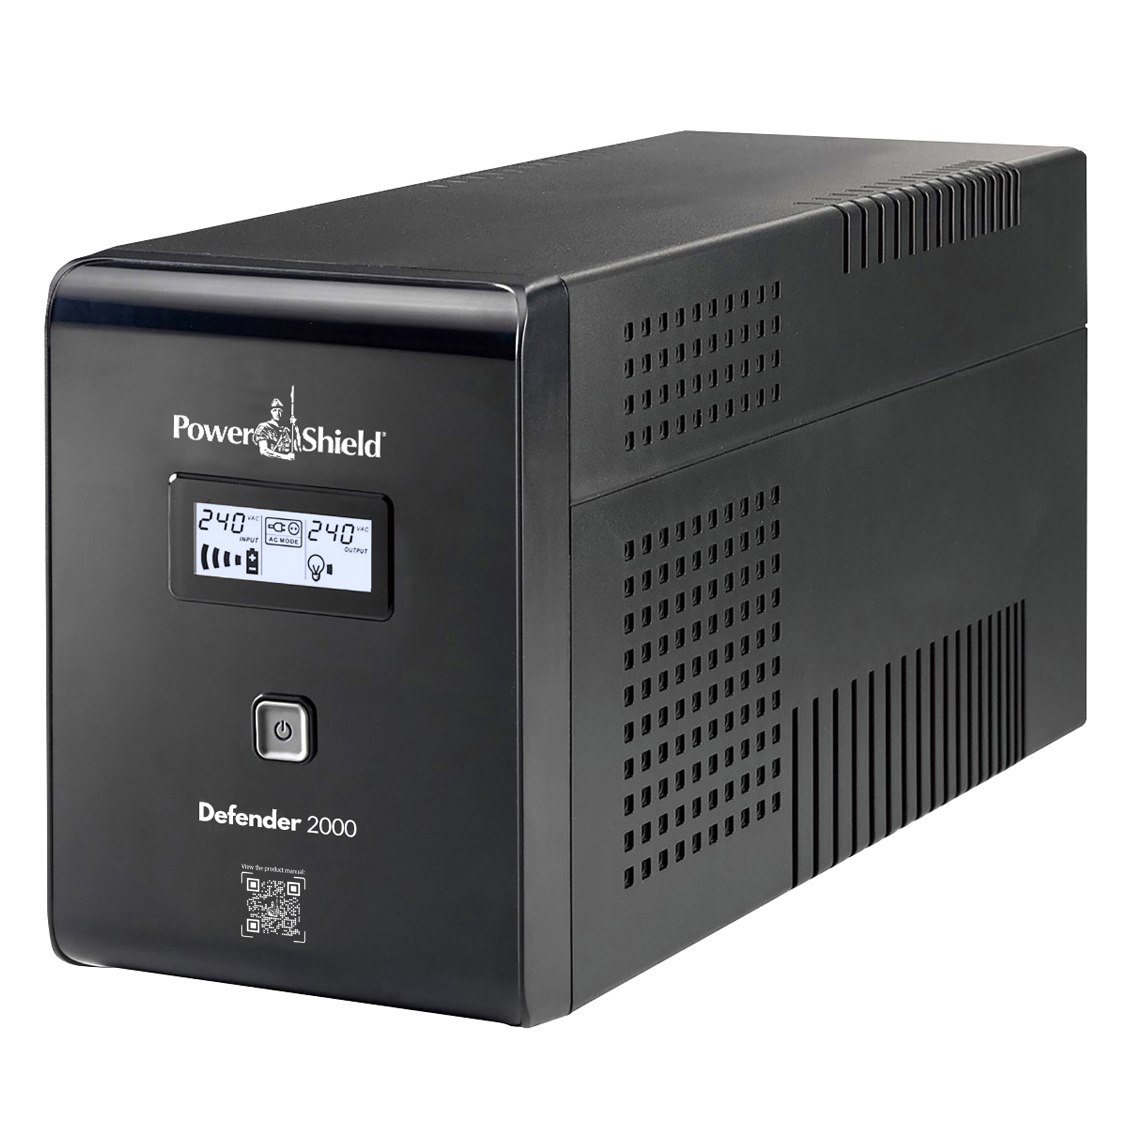 Powershield *Blitz* PowerShield Defender 2000Va / 1200W Line Interactive Ups With Avr, Australian Outlets And User Replaceable Batteries, 2 Year Warranty